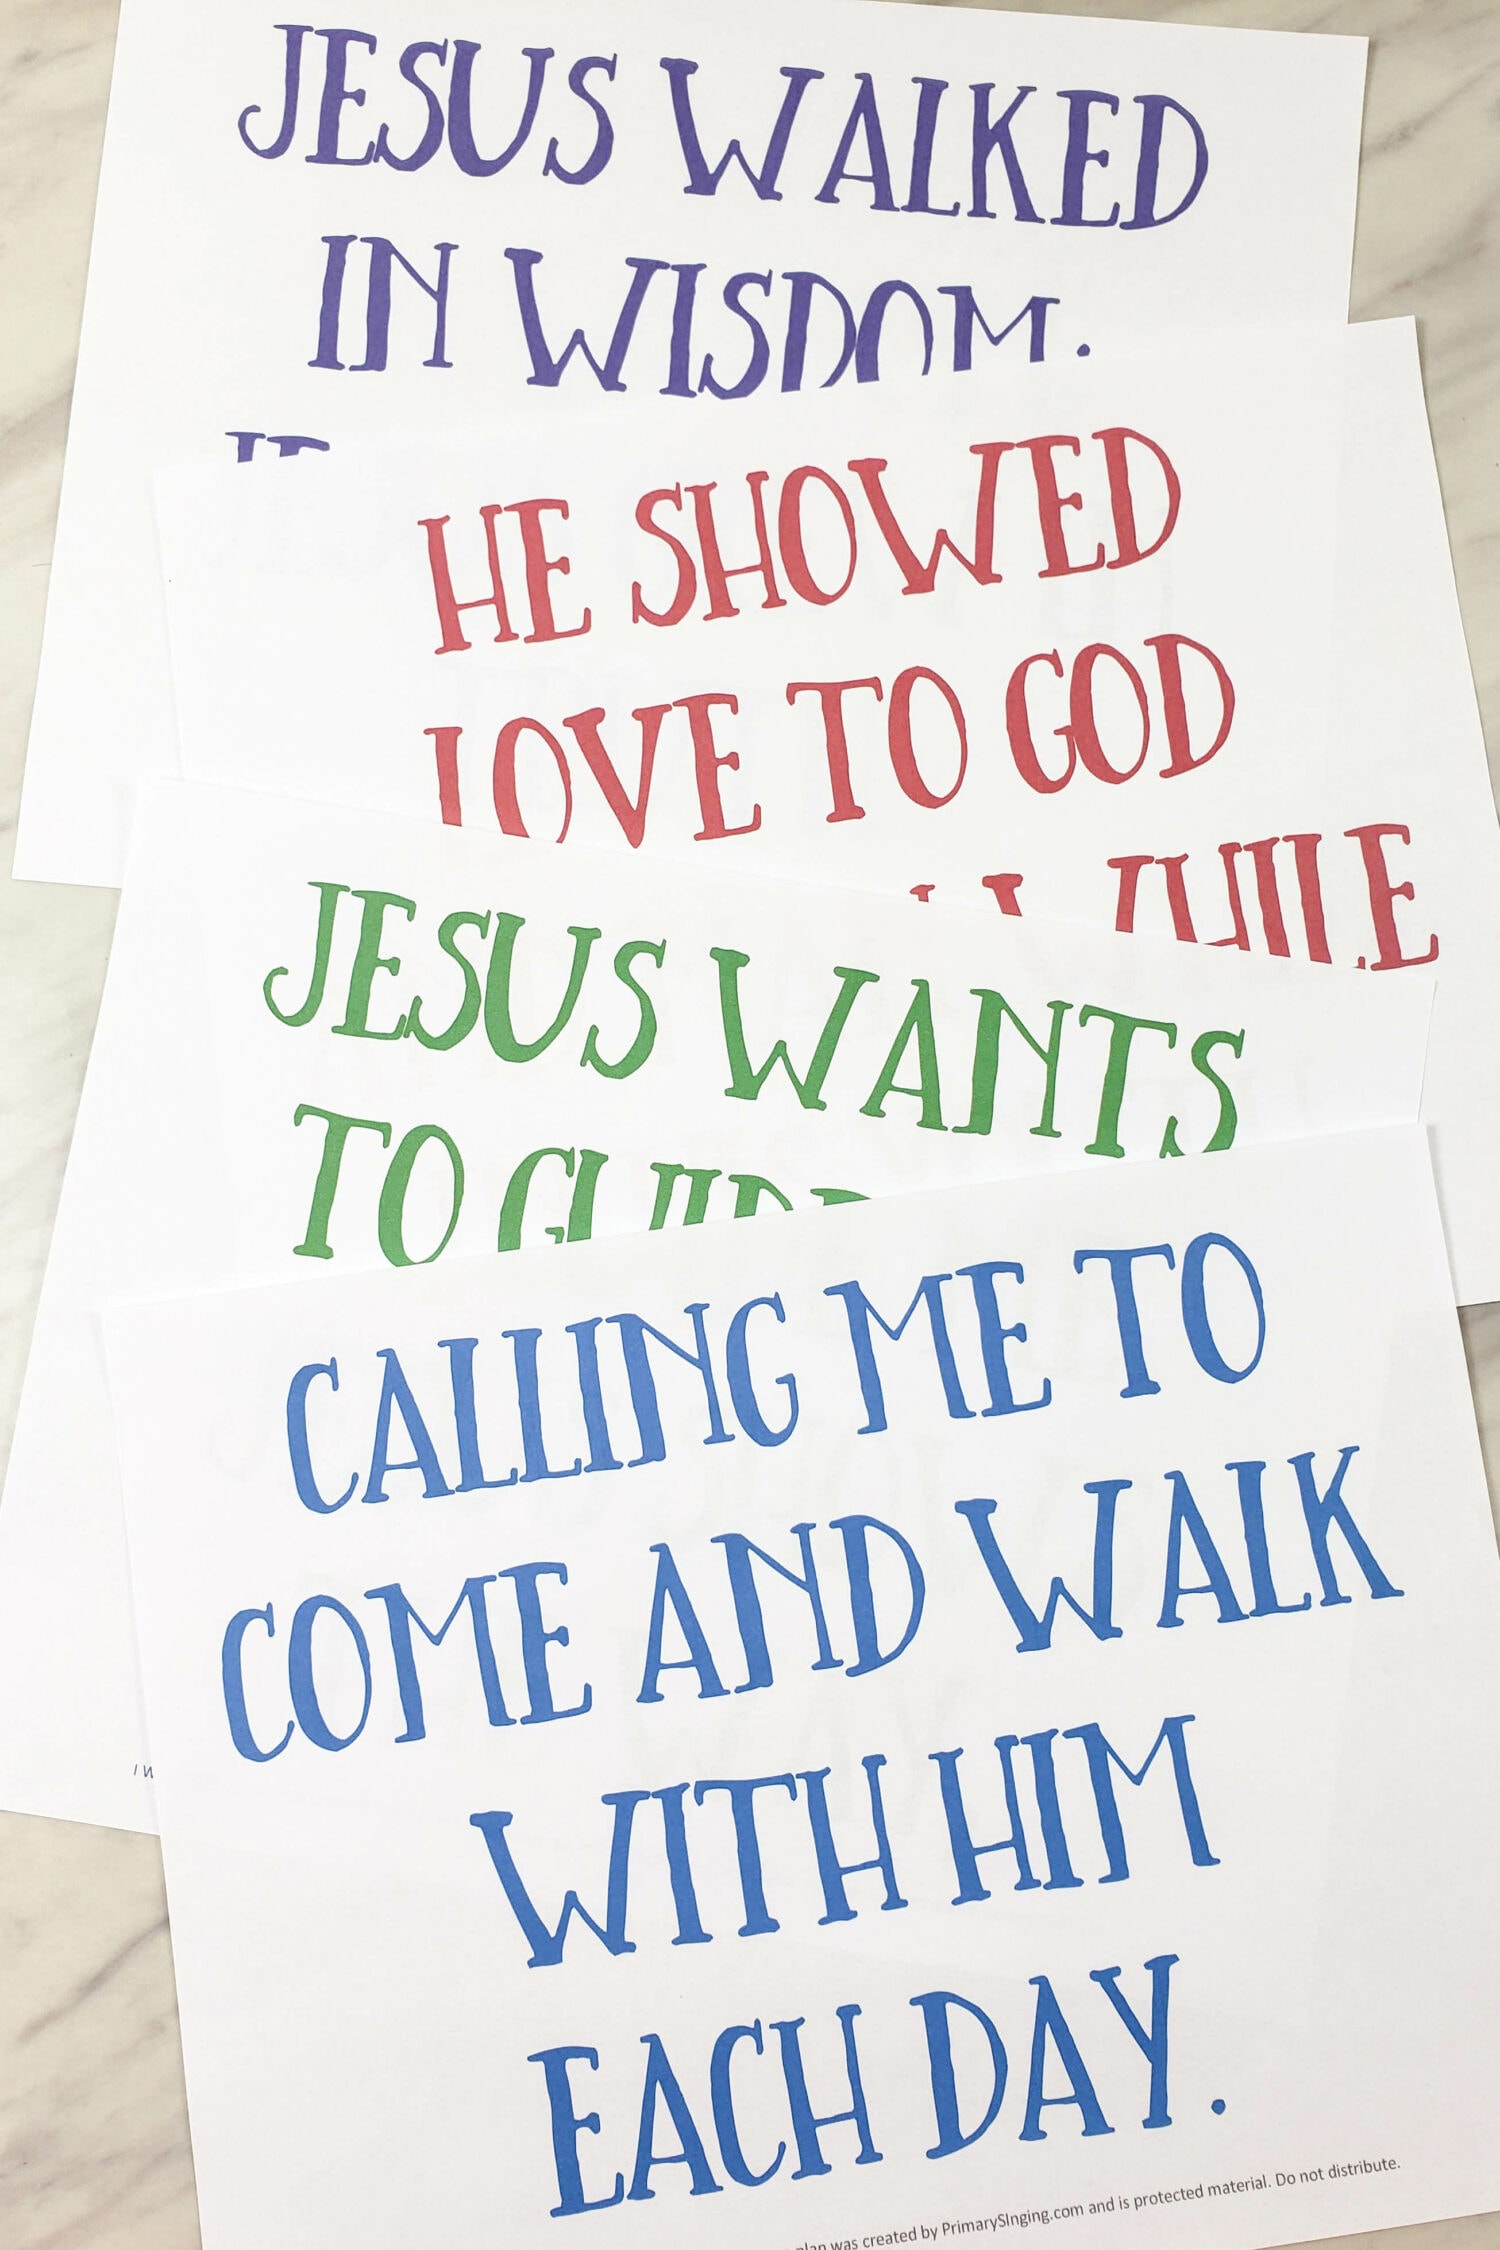 I Will Walk with Jesus Learn & Teach a fun and engaging singing time idea! 